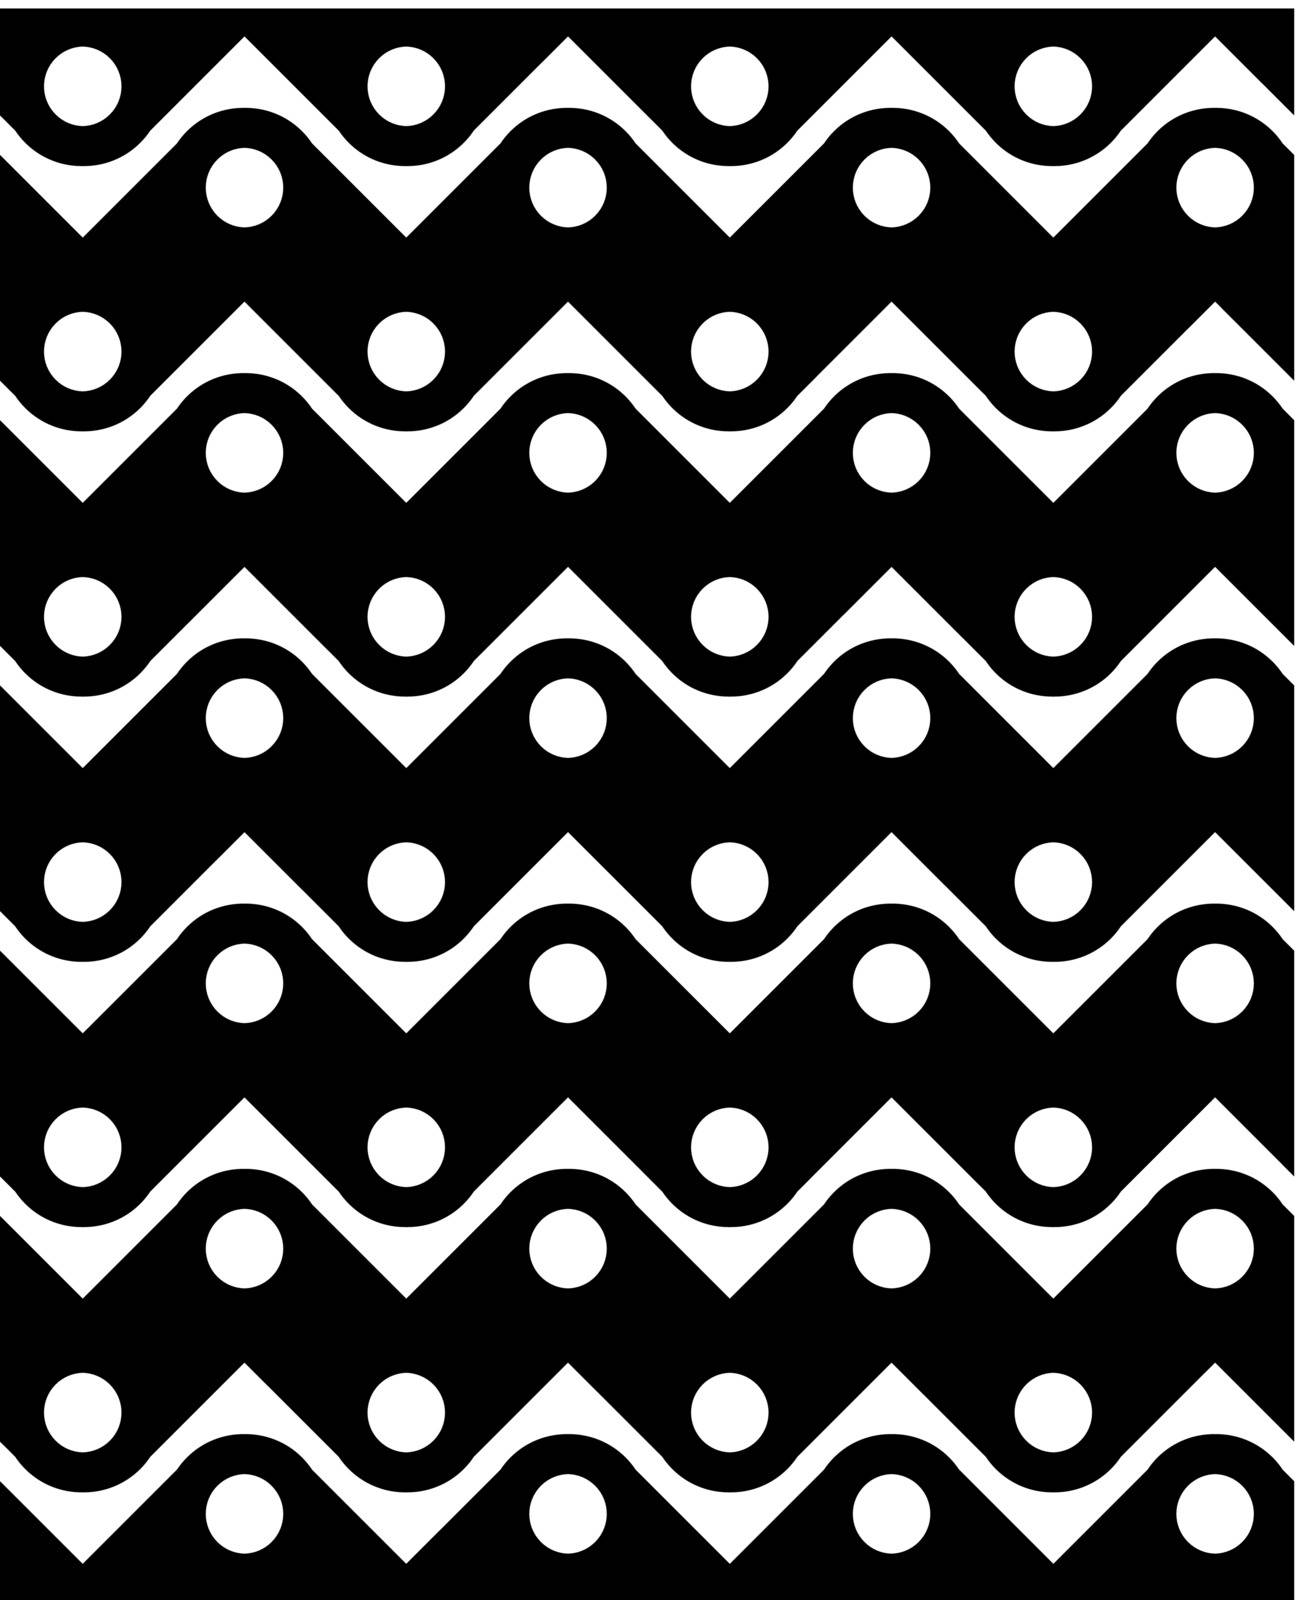 Abstract geometric black and white background, seamless pattern, vector background.